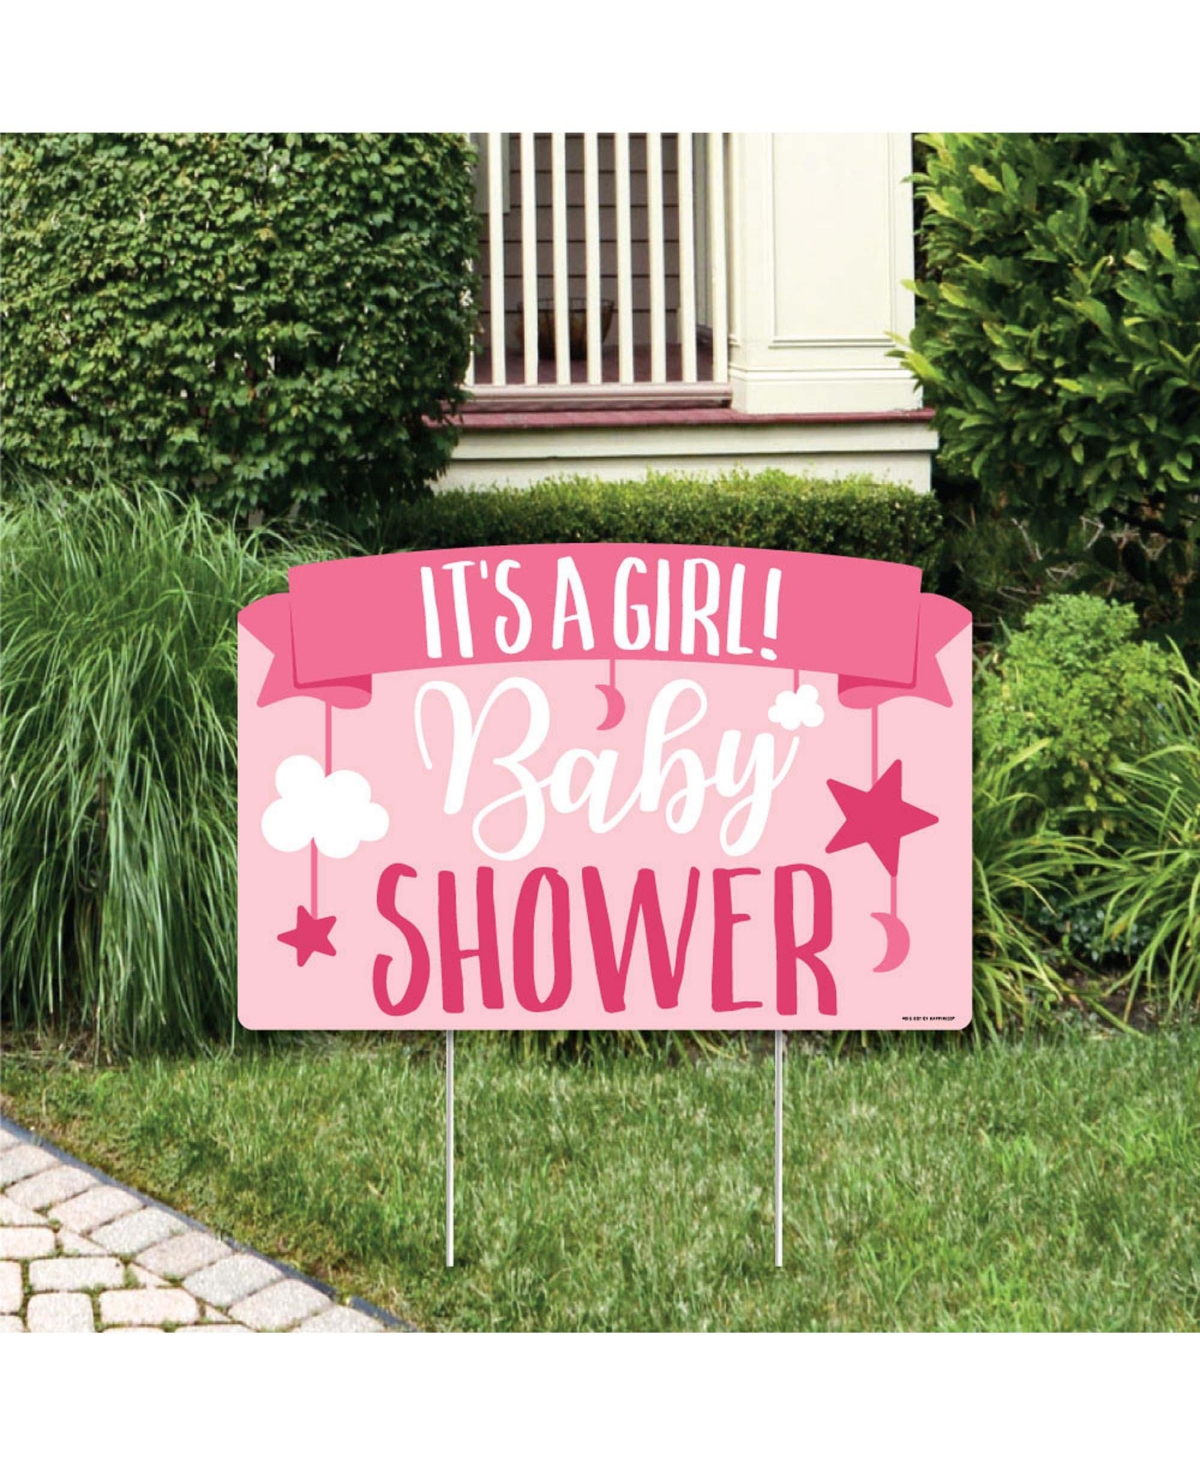 Its a Girl - Pink Baby Shower Yard Sign Lawn Decorations - Party Yardy Sign